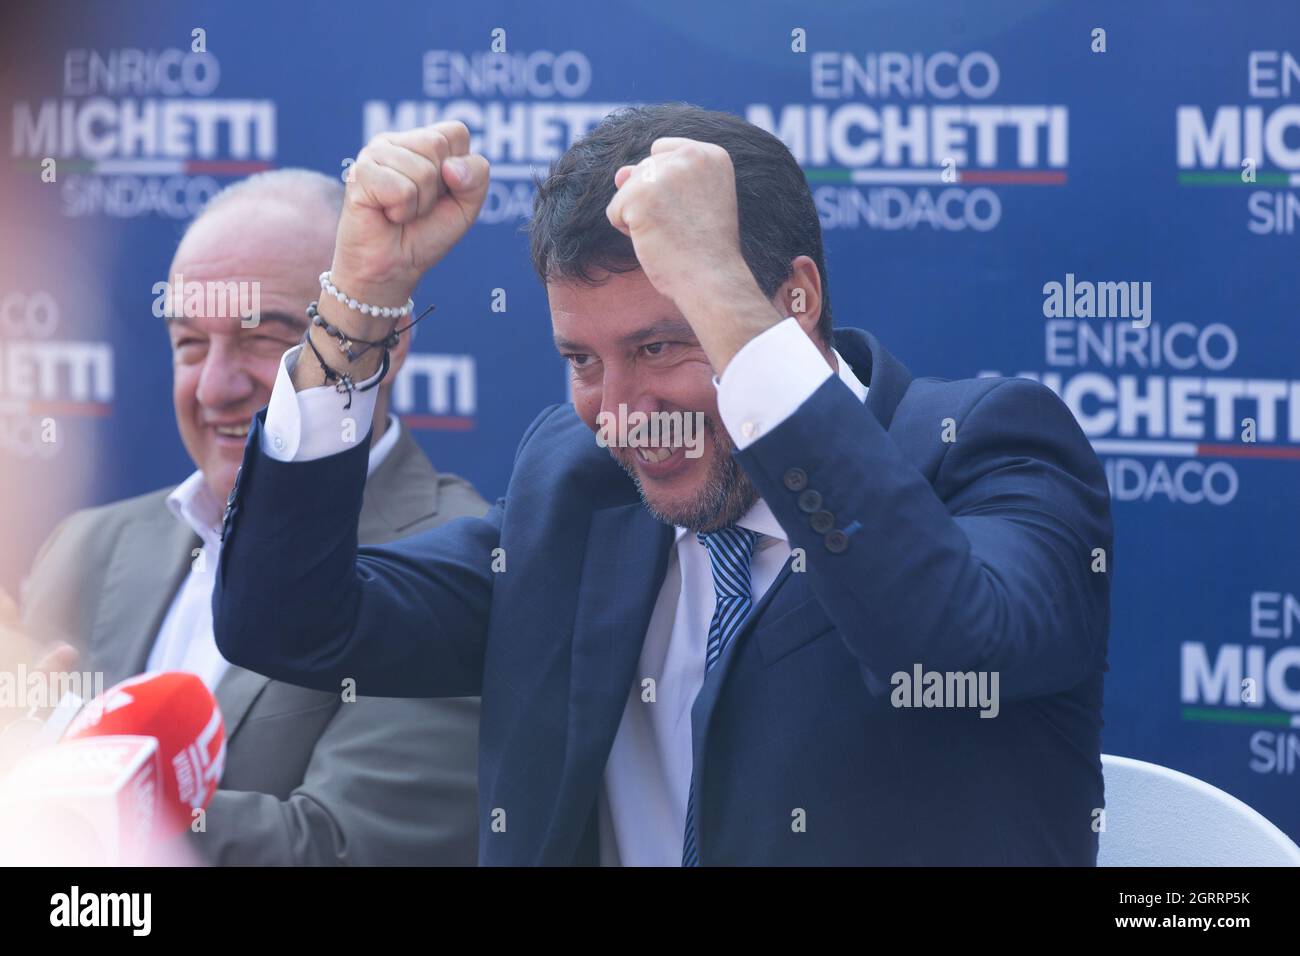 Rome, Italy. 01st Oct, 2021. Matteo Salvini during press conference in Spinaceto district of Rome to close center-right electoral campaign (Photo by Matteo Nardone/Pacific Press) Credit: Pacific Press Media Production Corp./Alamy Live News Stock Photo